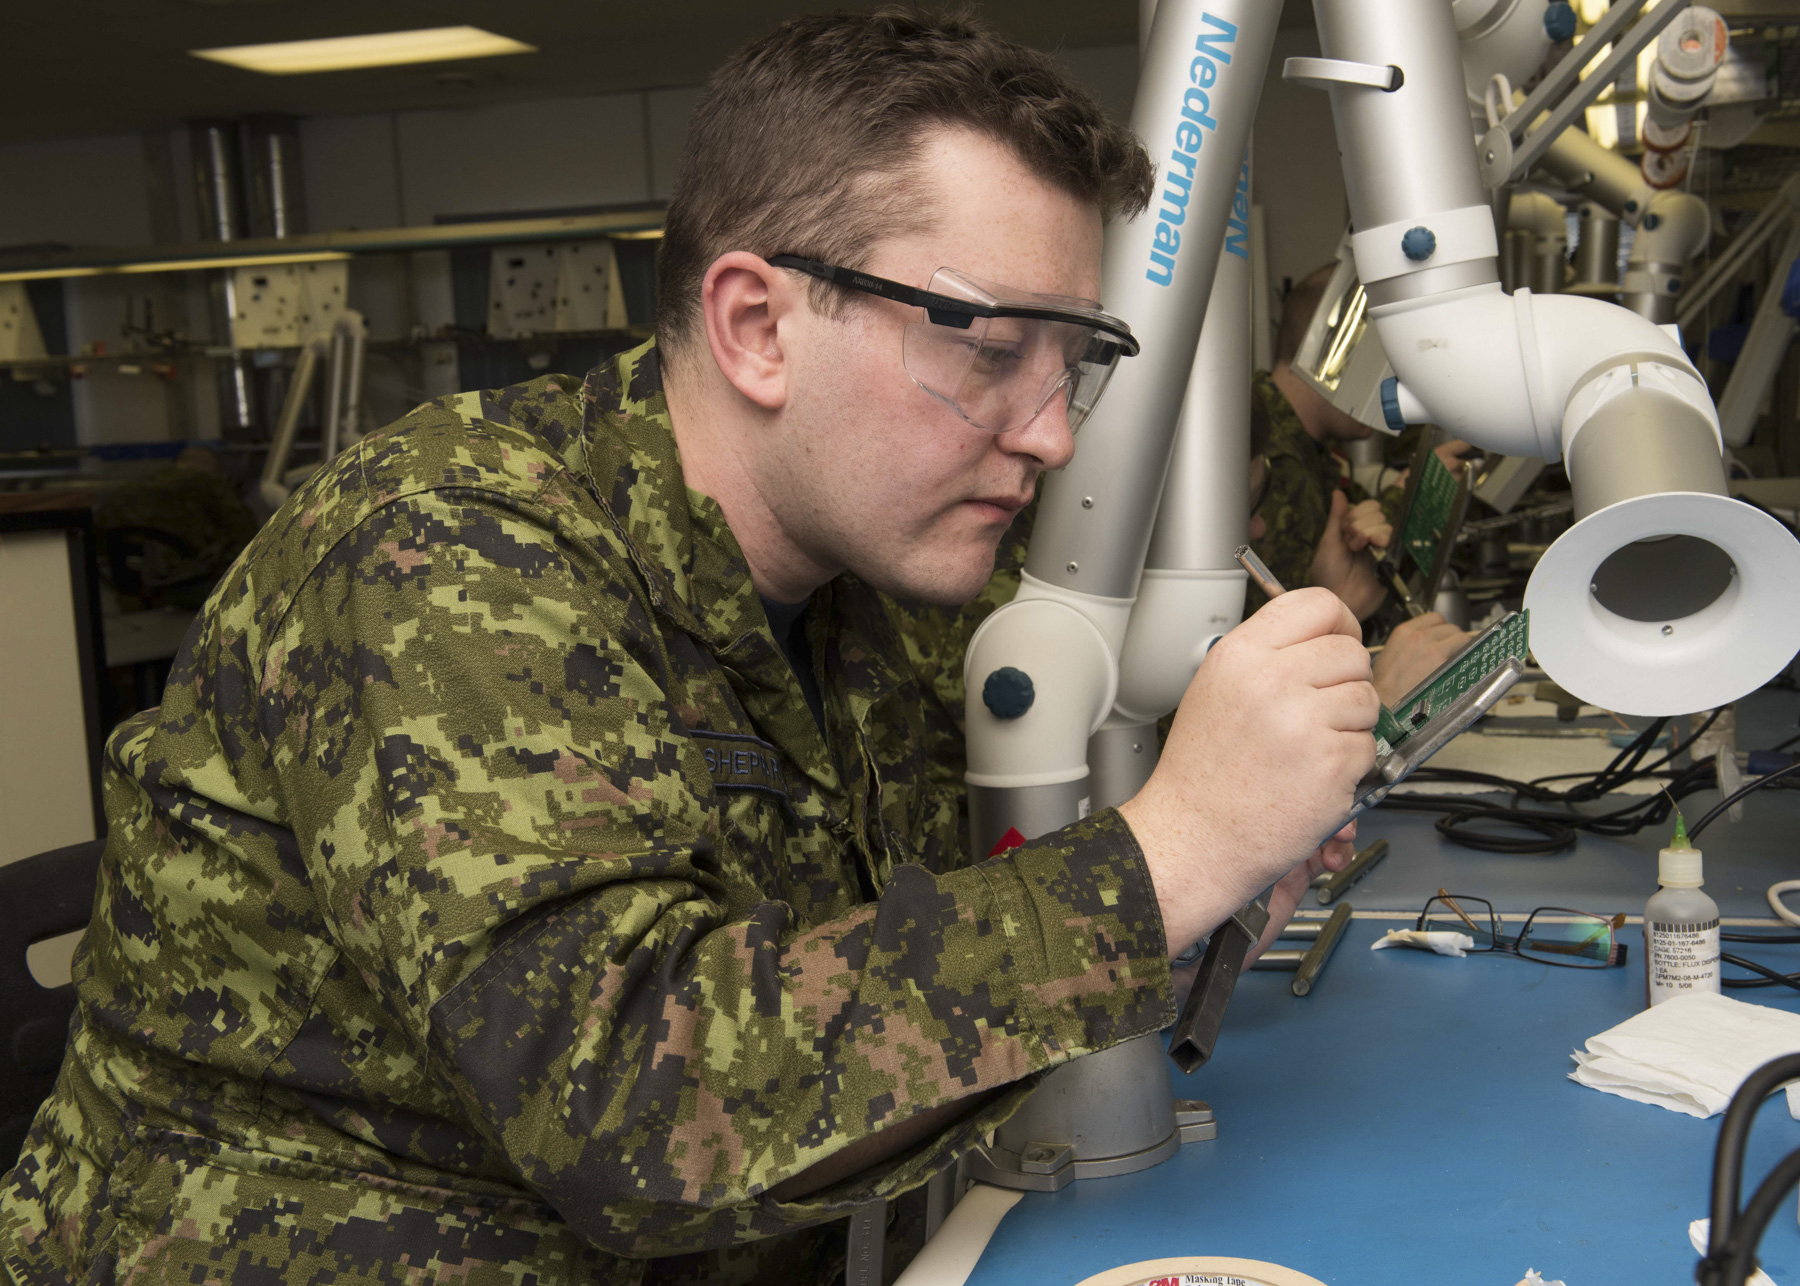 Students at the Canadian Forces School of Aerospace, Technology and Engineering at 16 Wing in Borden, Ontario, are learning the skillsets required of modern technology. Photo: 16 Wing Imaging Section.